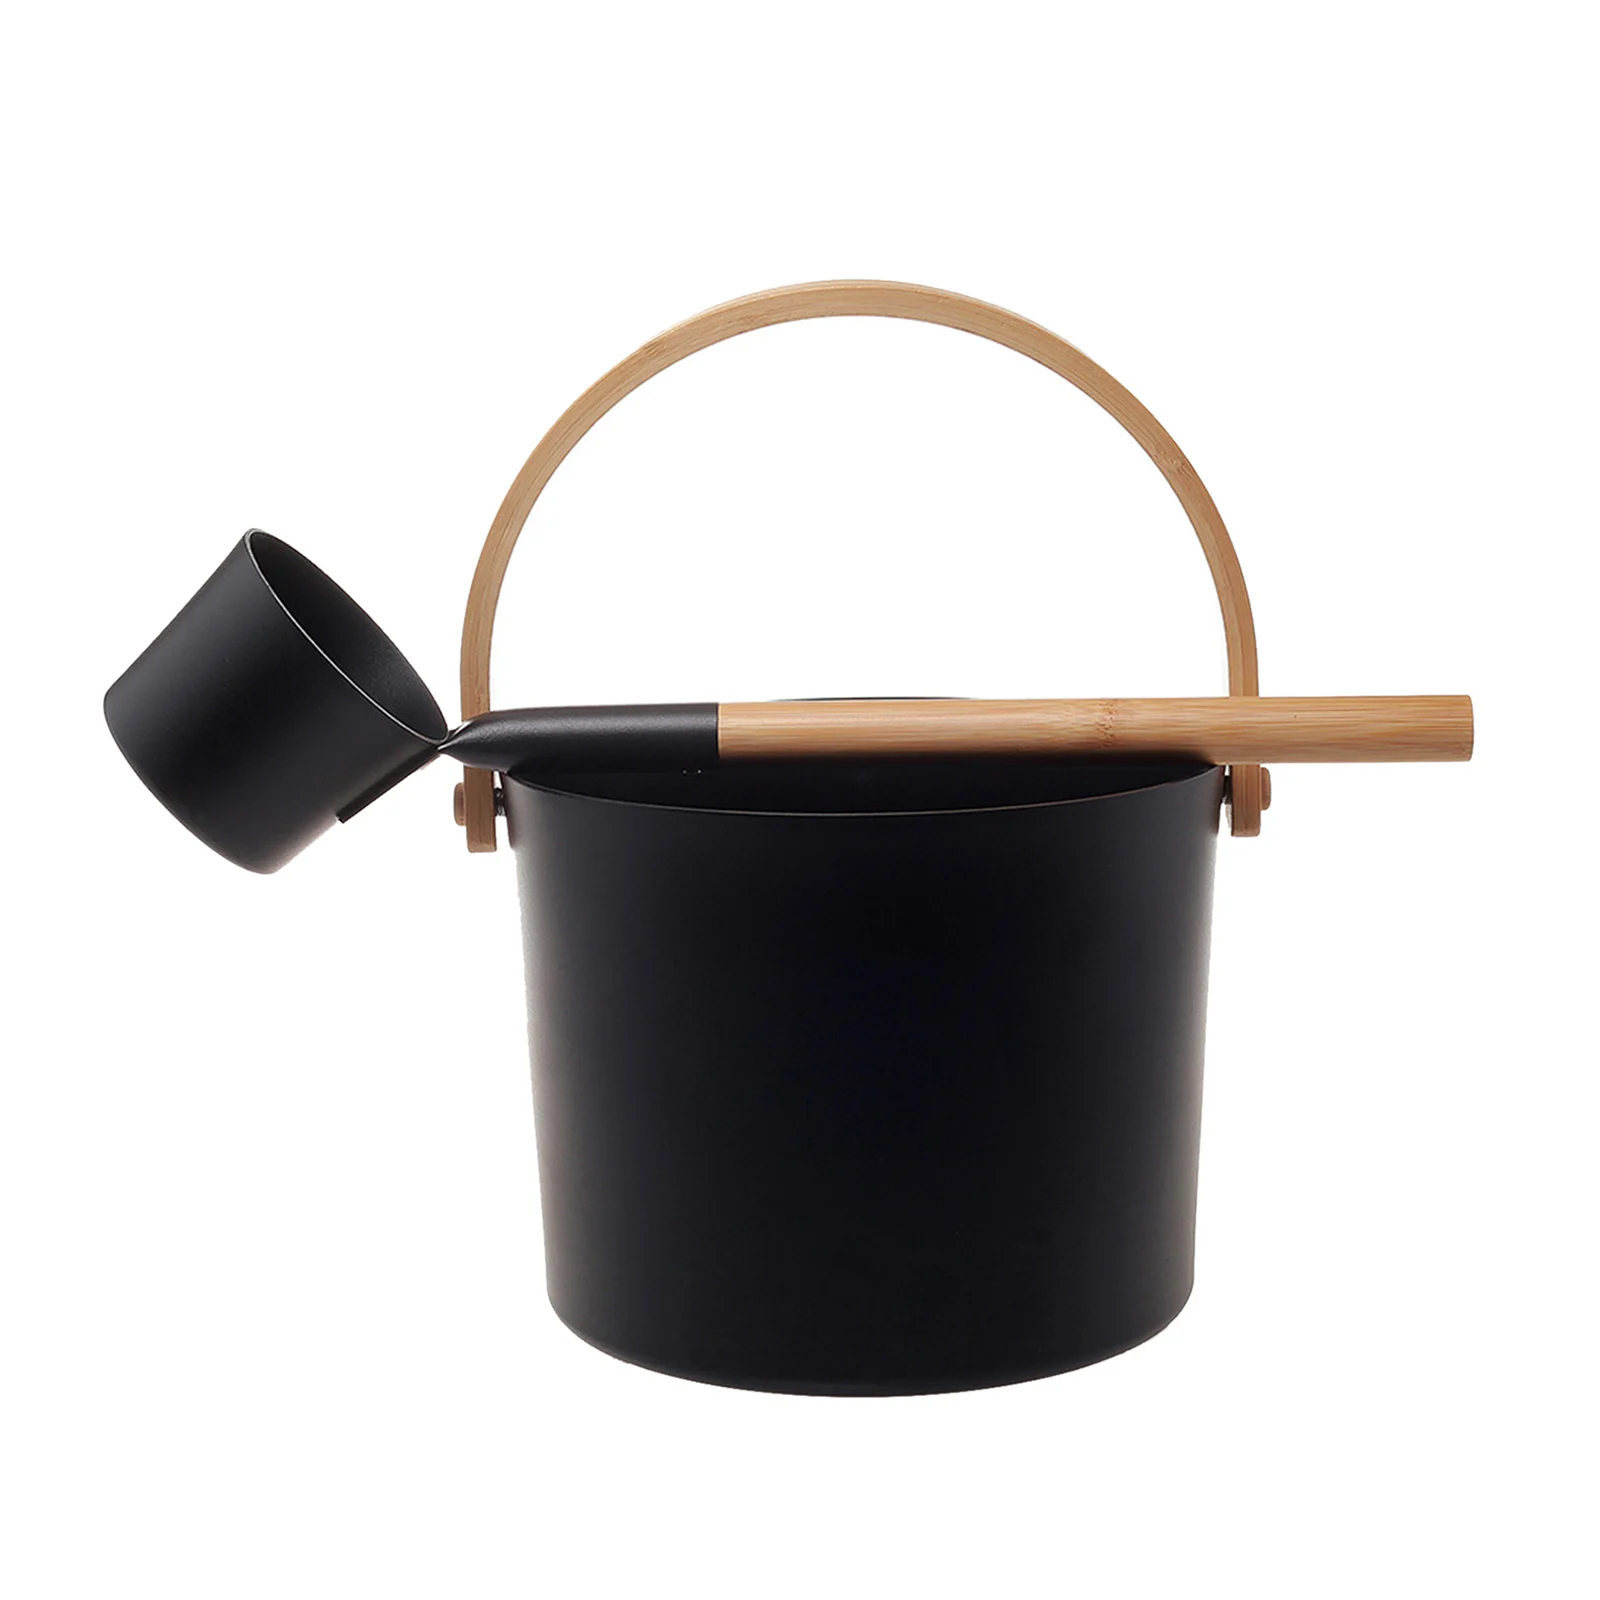 5L aluminum sauna bucket and ladle kit, SPA bath accessories with wooden handle